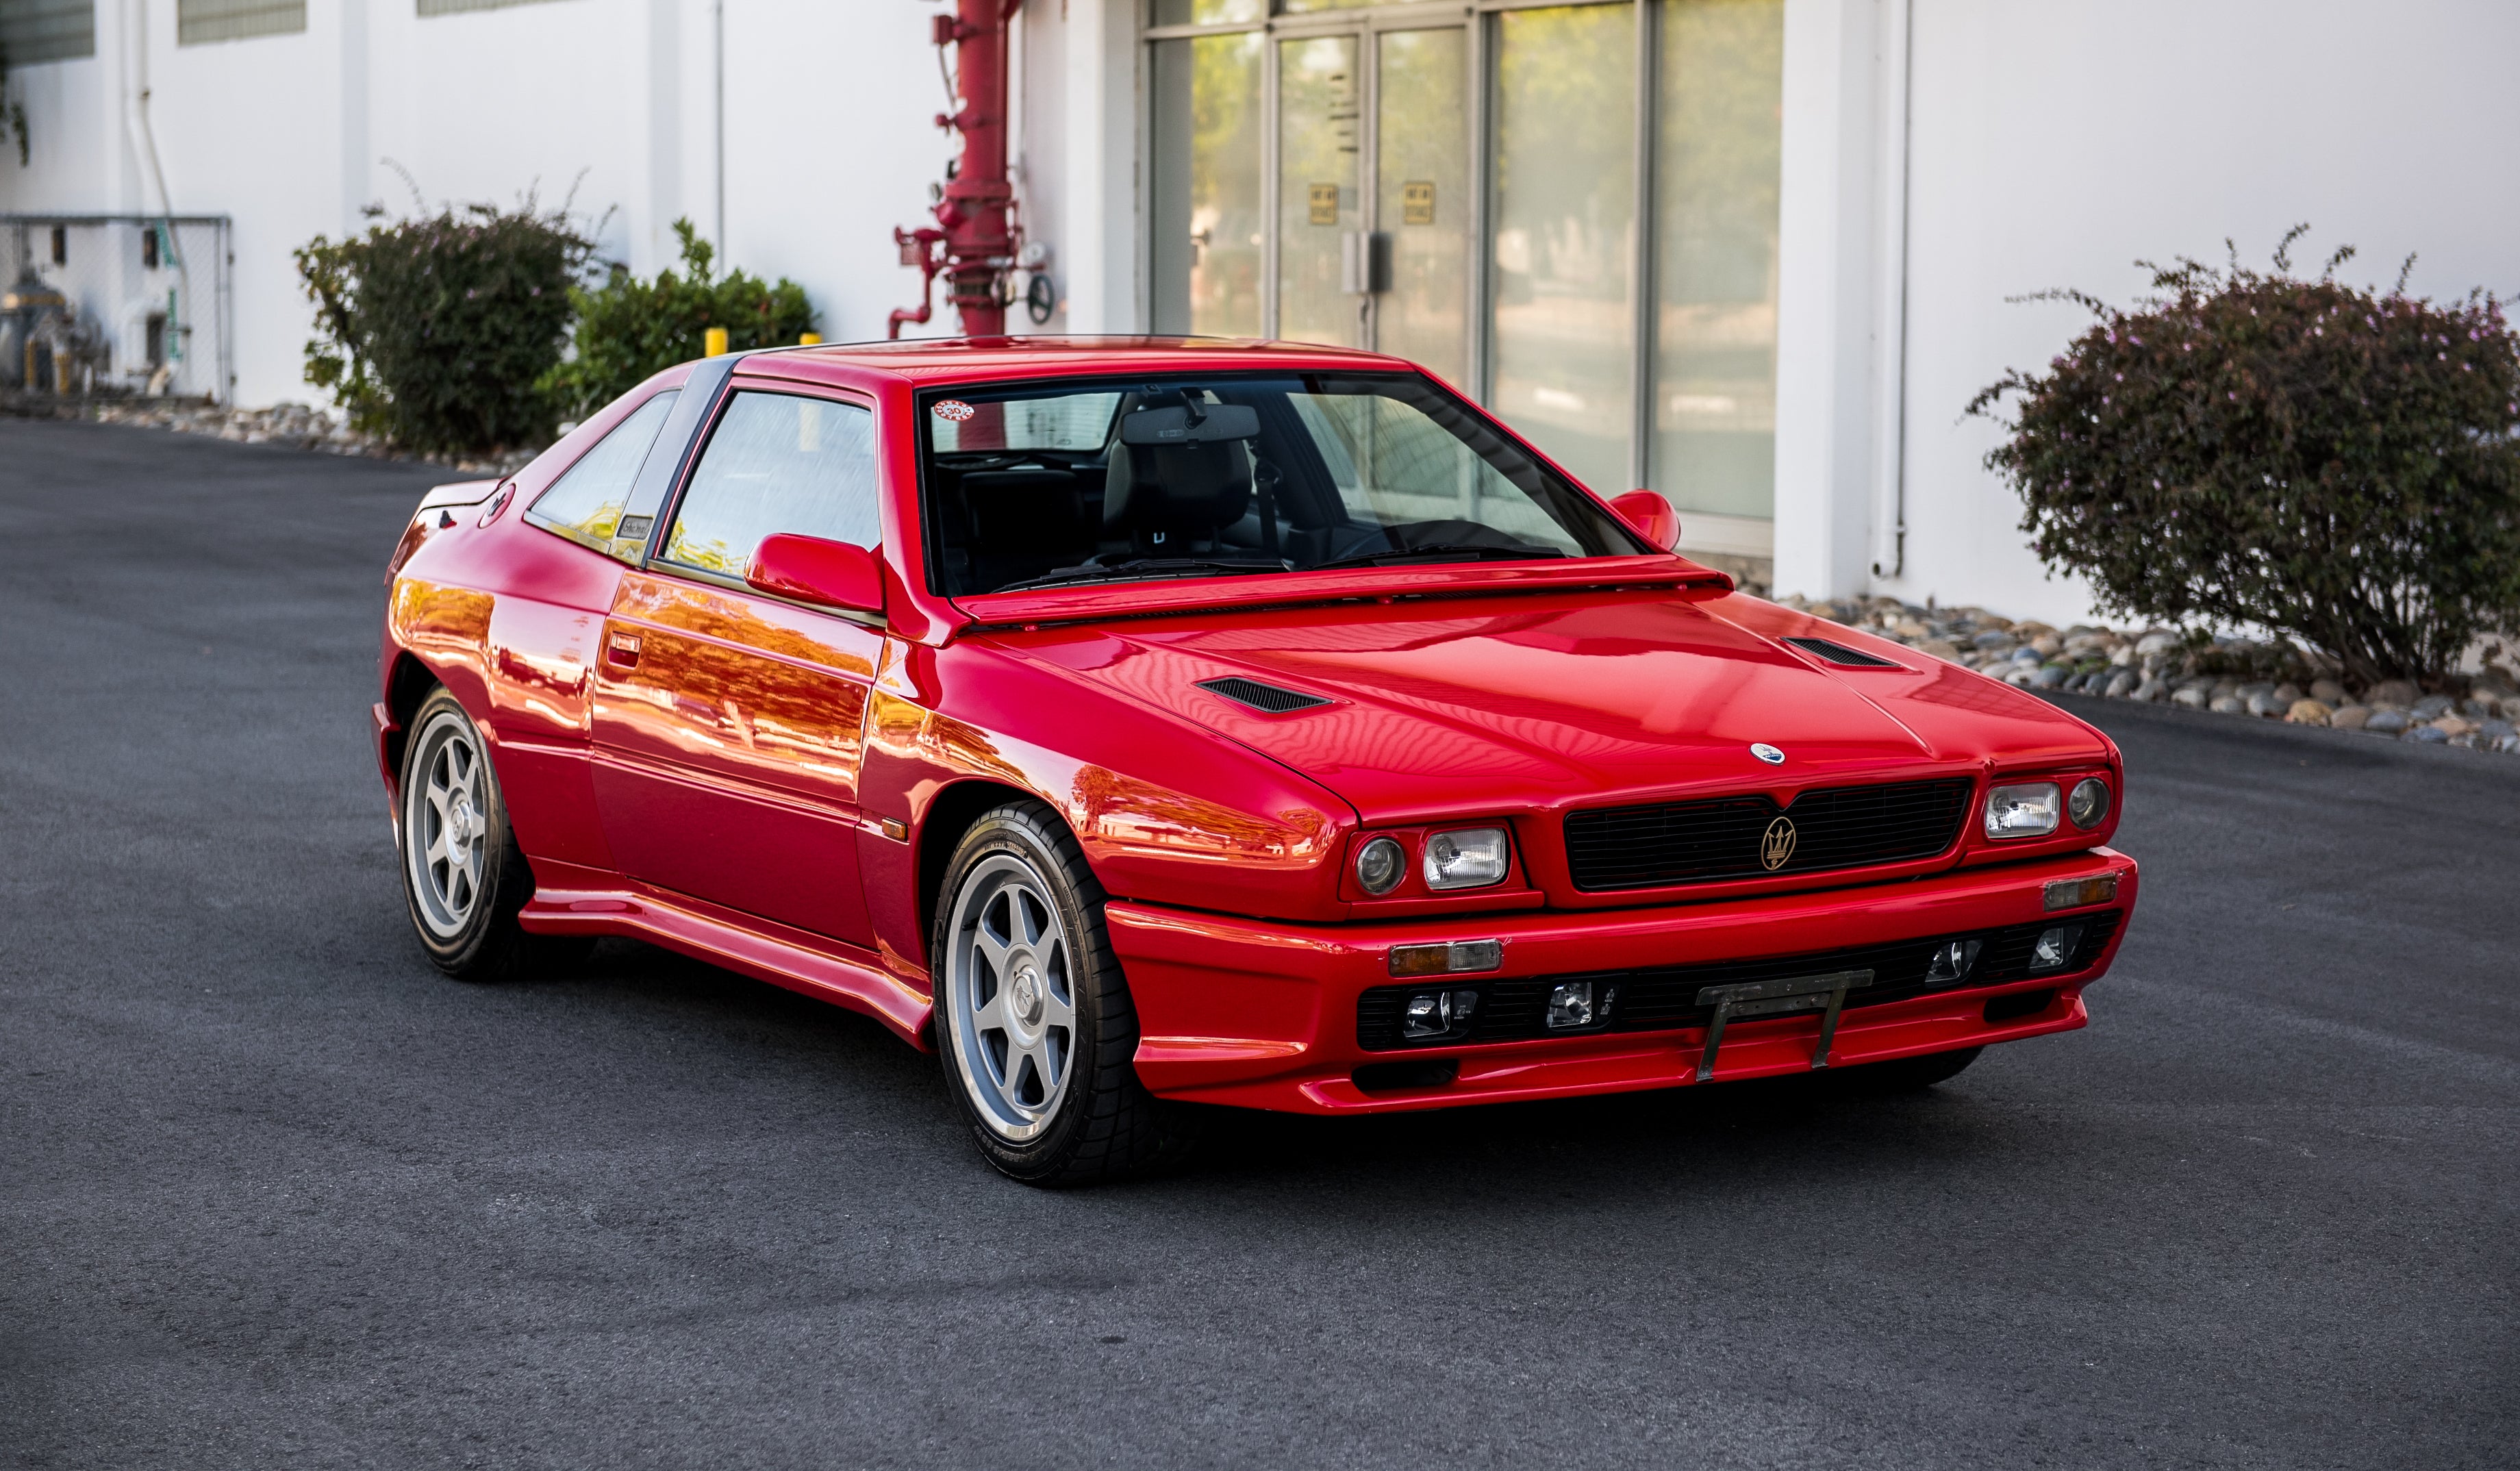 The Maserati Shamal is A Whirlwind of a Car